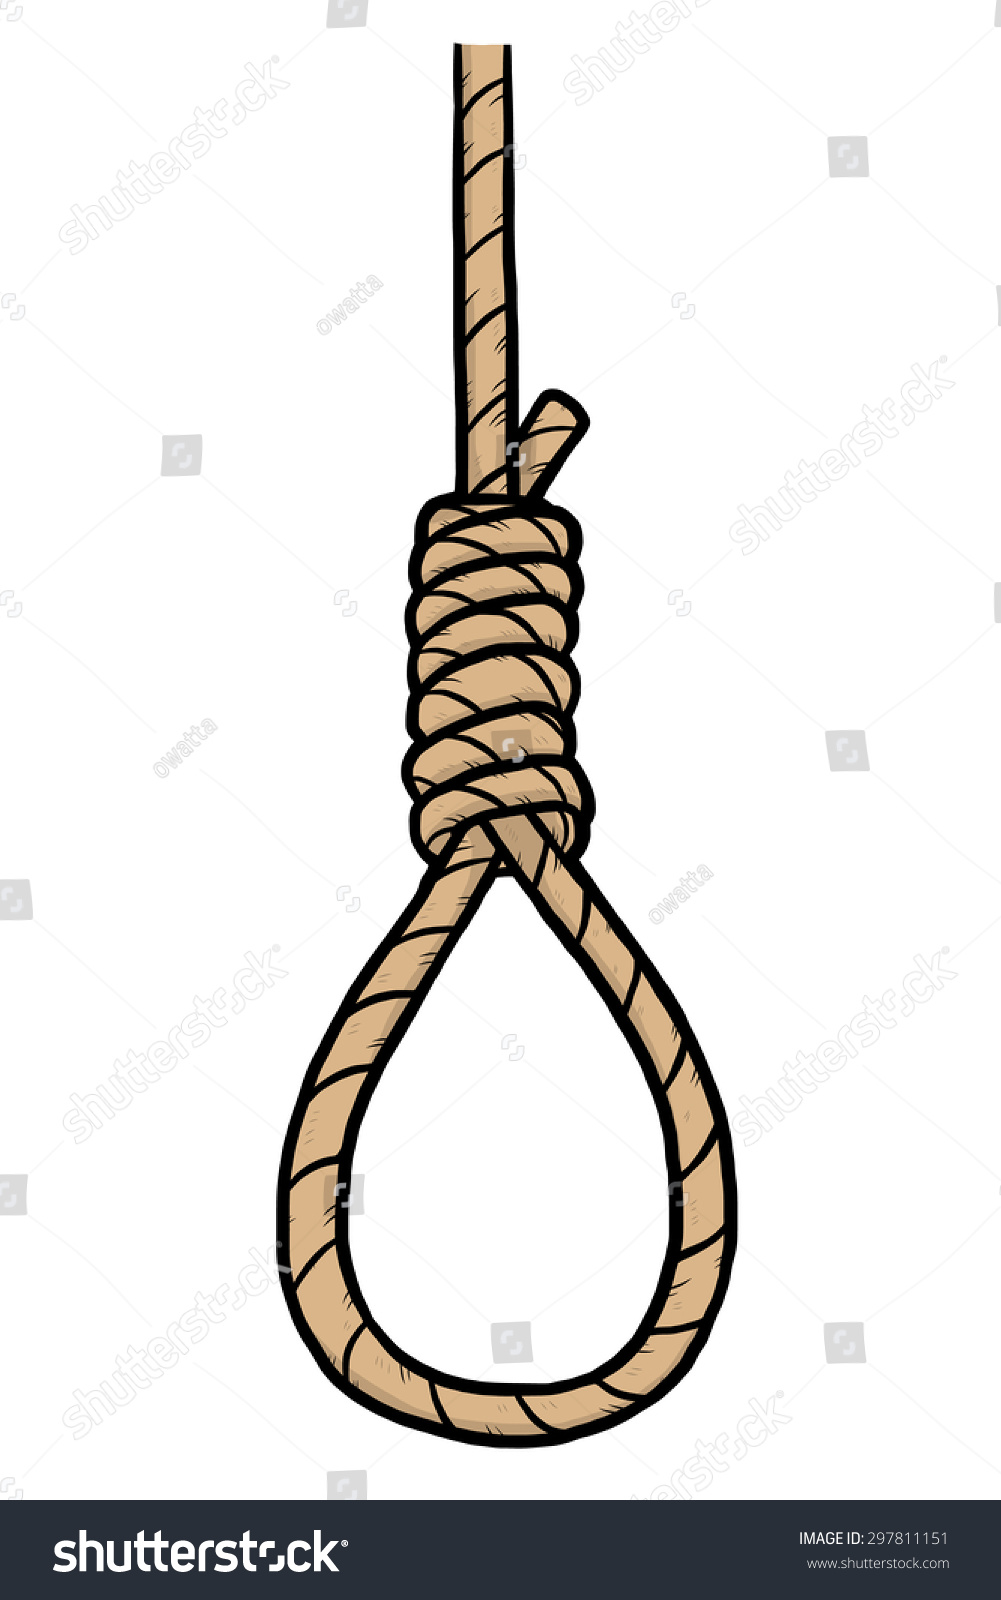 stock-vector-suicide-rope-cartoon-vector-and-illustration-hand-drawn-style-isolated-on-white-background-297811151.jpg